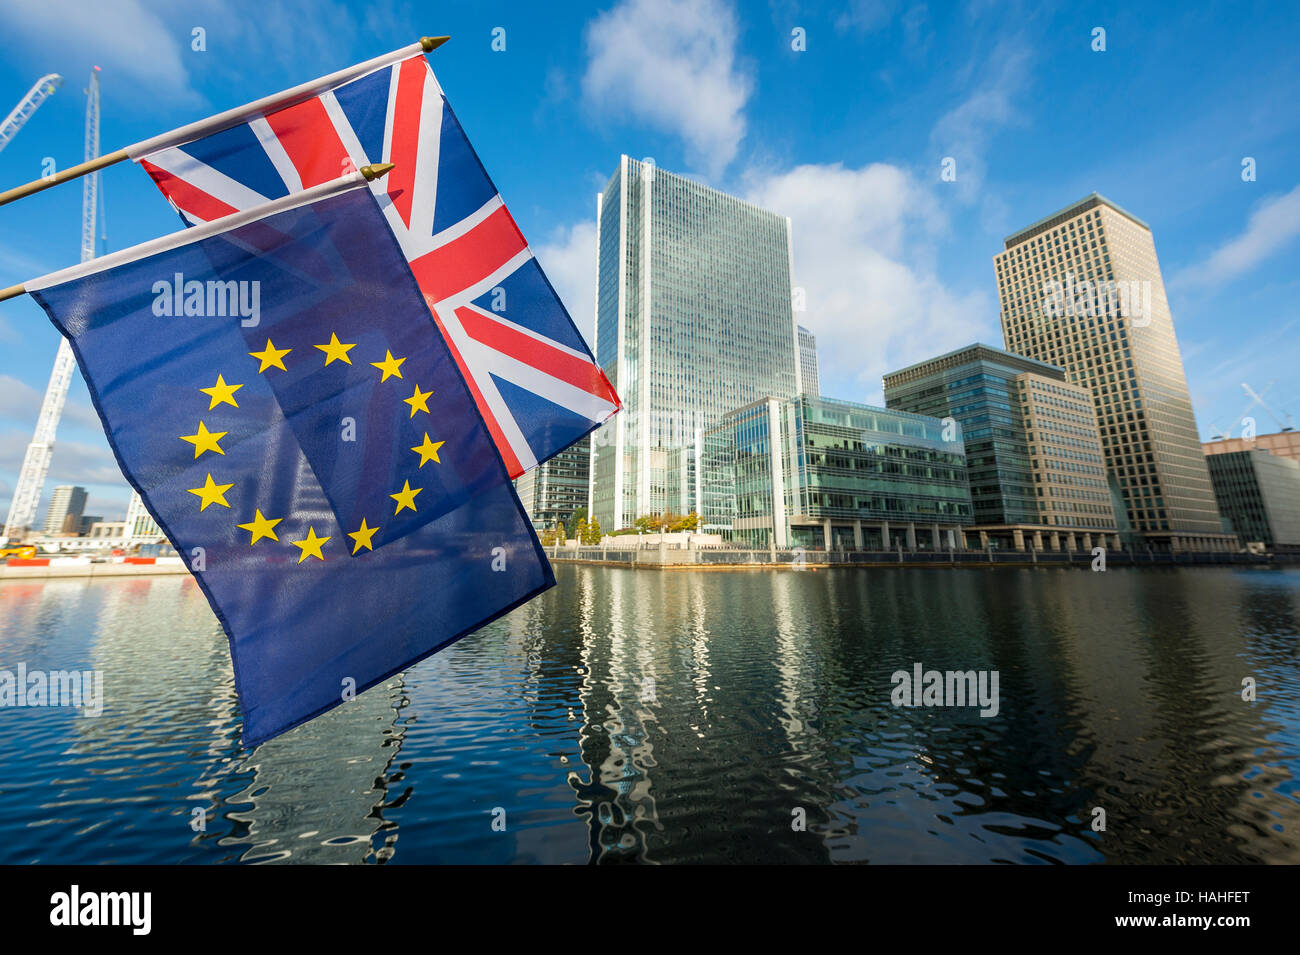 European Union and Union Jack flags flying above reflections of modern business towers of London's new financial district Stock Photo